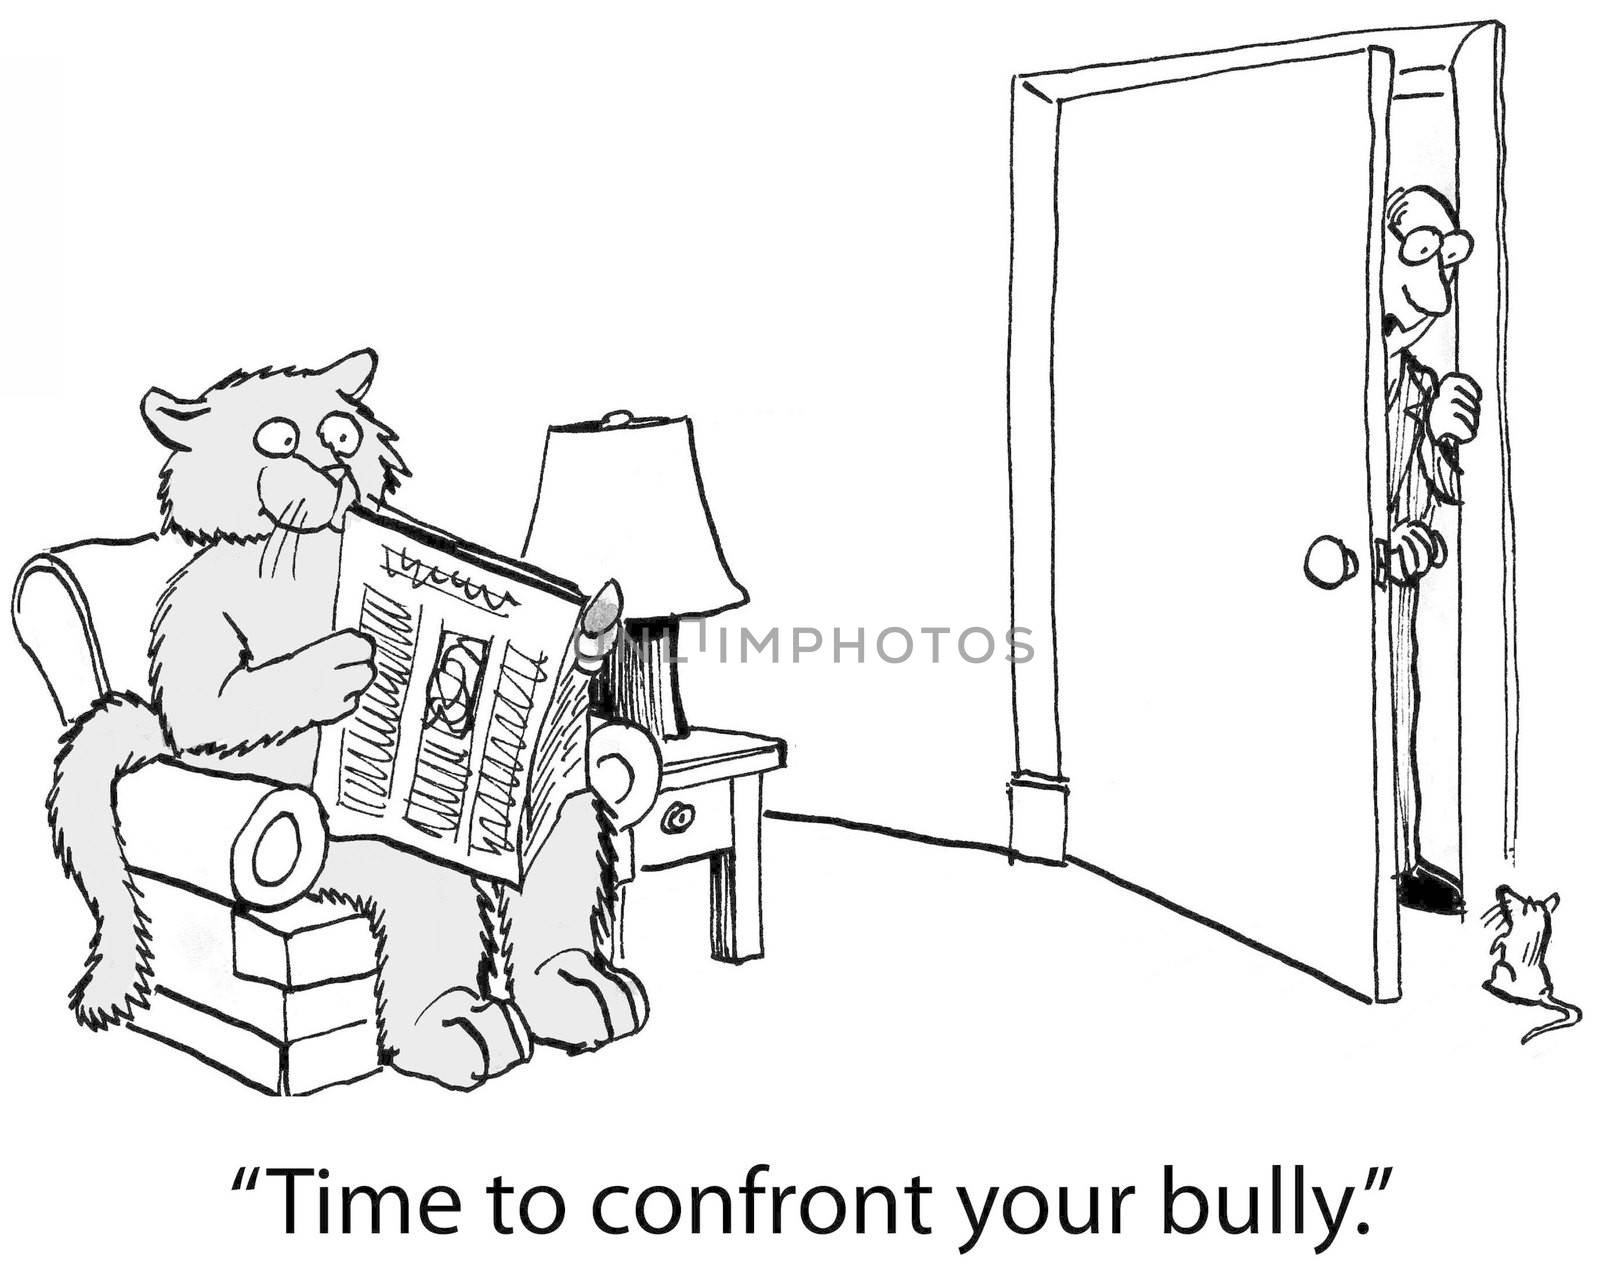 "Time to confront your bully."